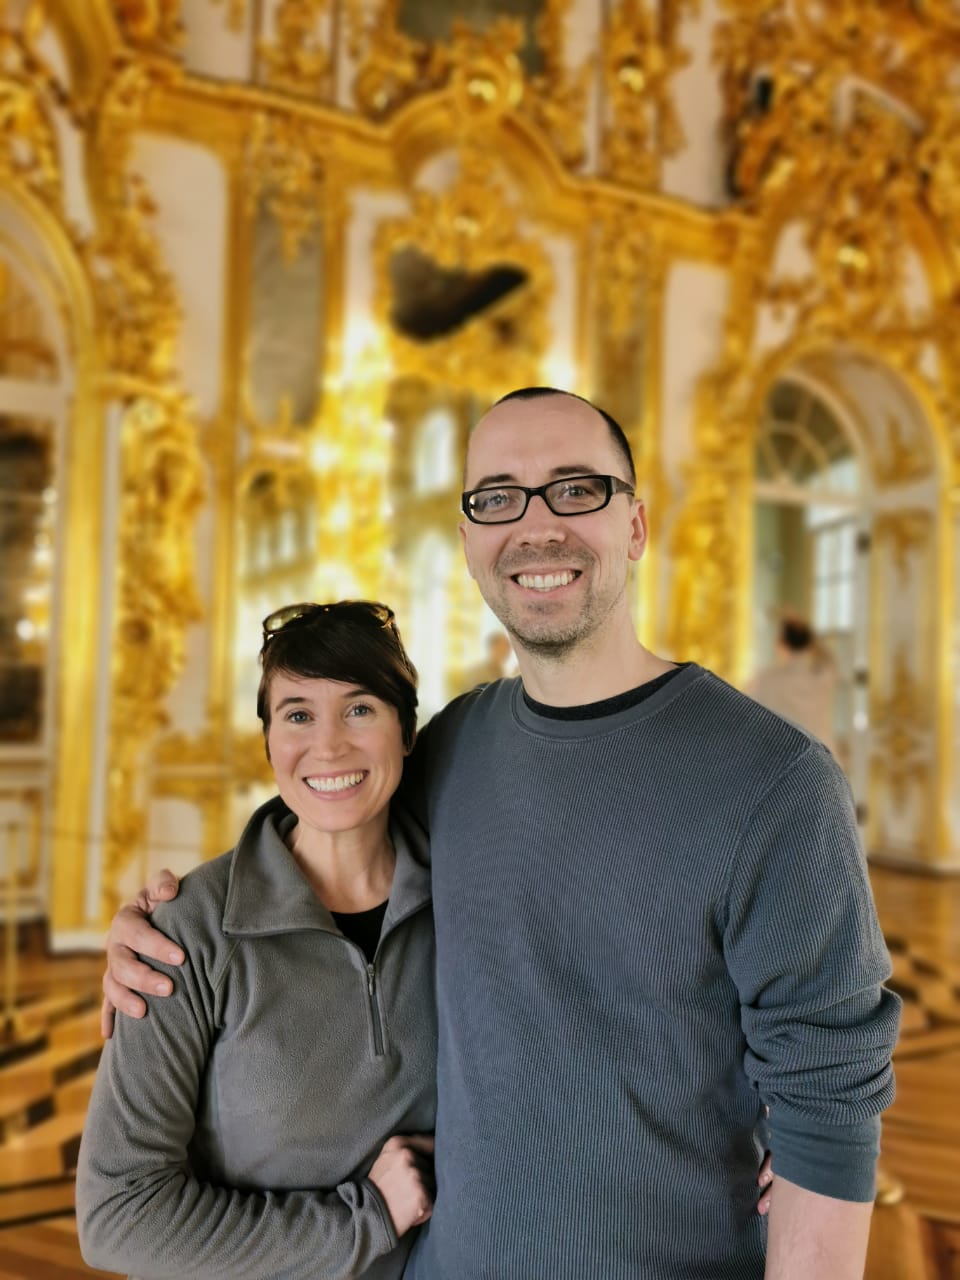 St Petersburg Russia tours: Excursion in the Catherine's Palace